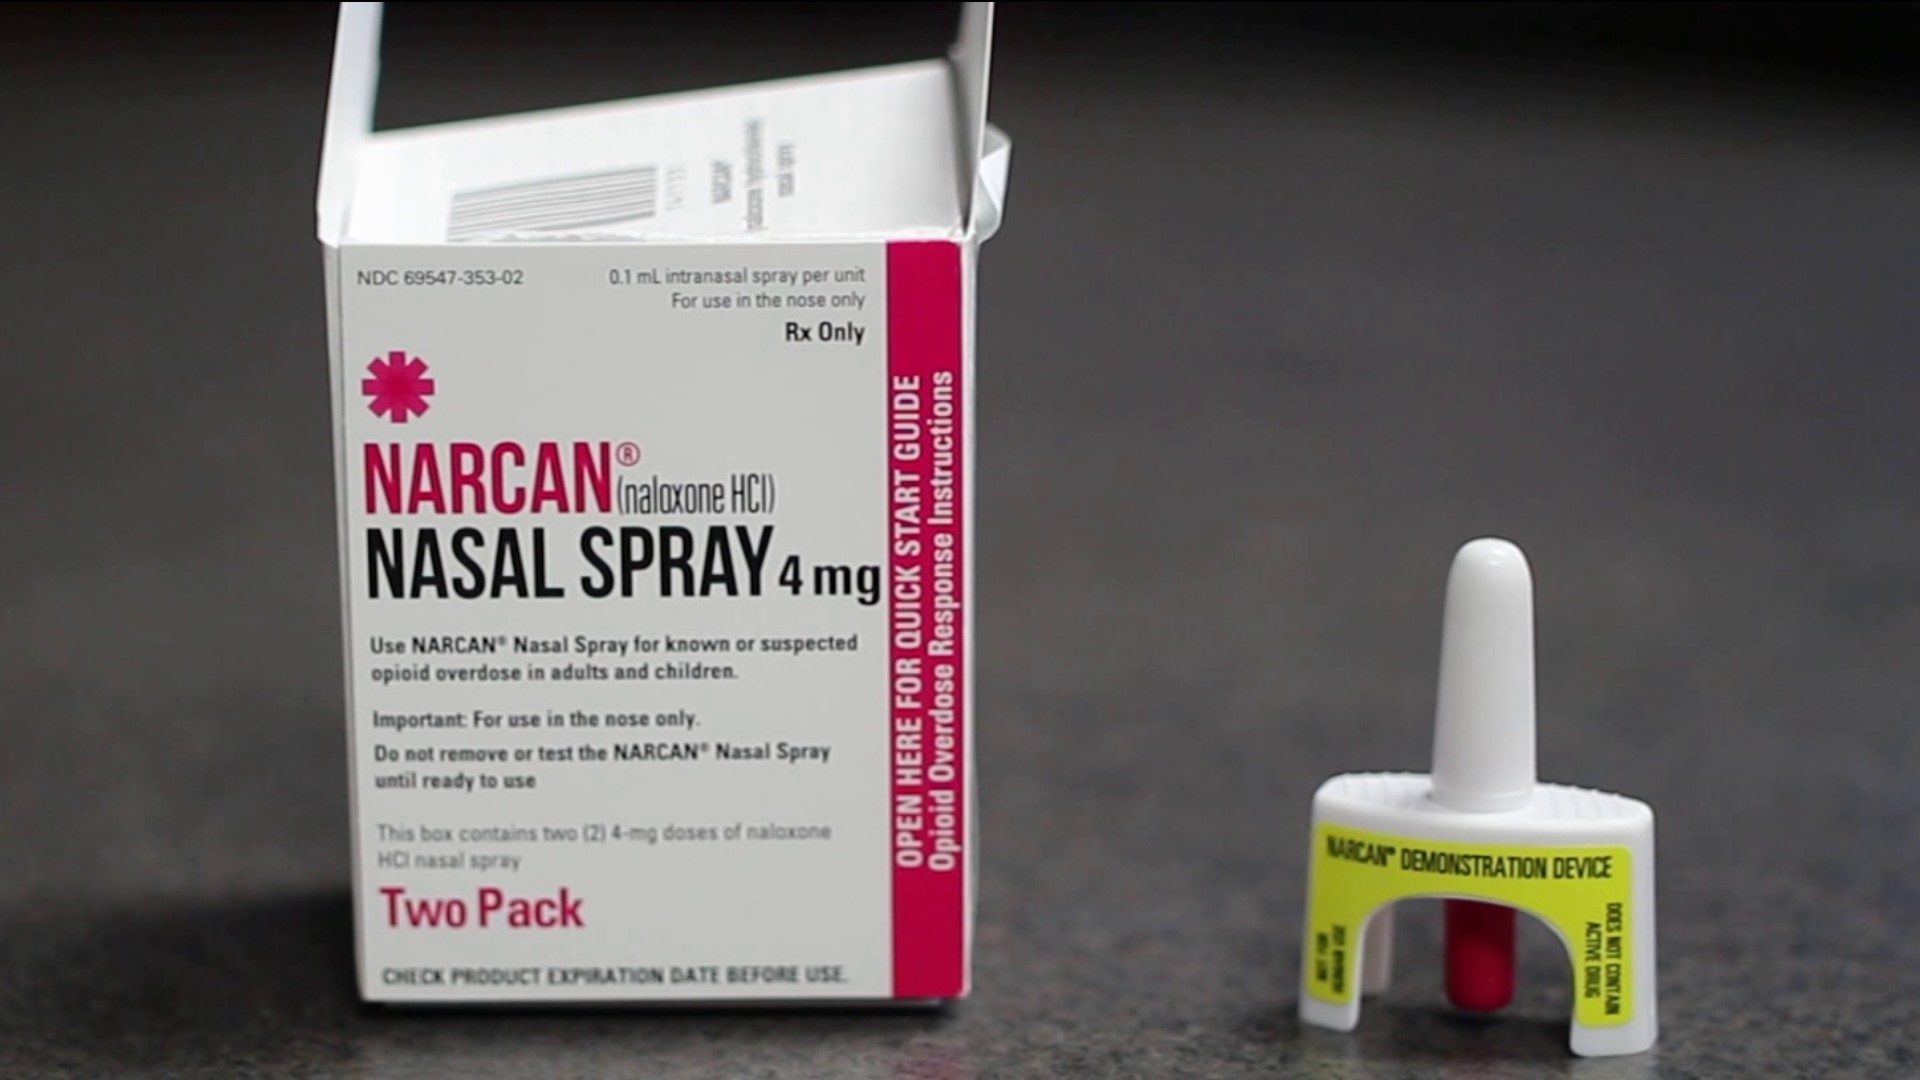 Johnson county organizations came together to bring awareness and Narcan training to the community in the midst of a nationwide opioid epidemic.